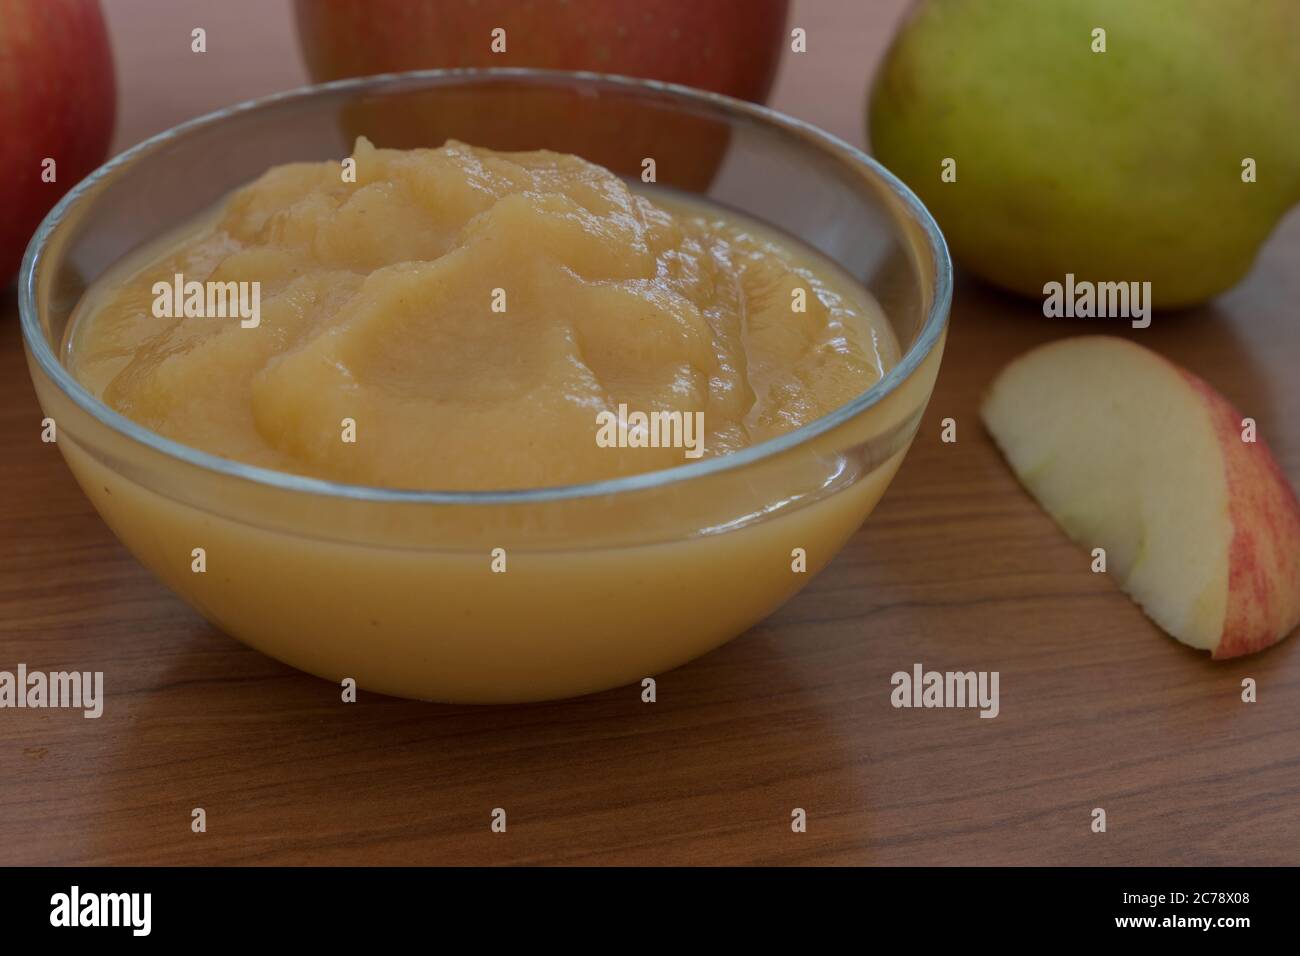 closeup of a glass bowl filled with apple puree and fresh apple in the background Stock Photo